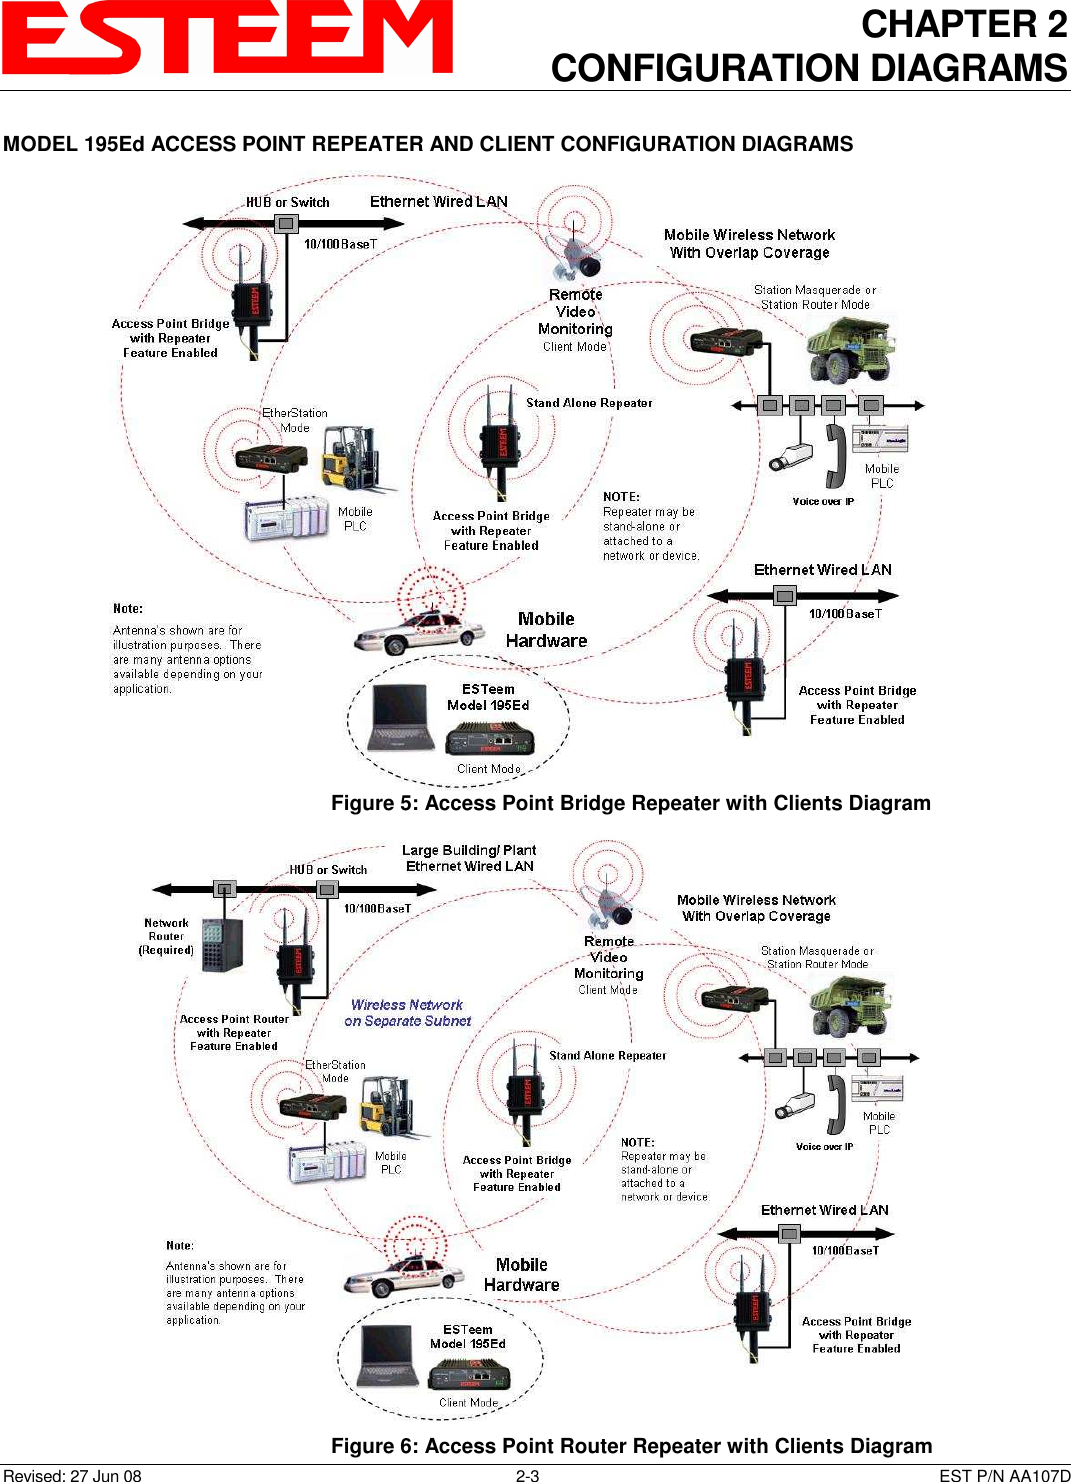 CHAPTER 2 CONFIGURATION DIAGRAMS   Revised: 27 Jun 08  2-3  EST P/N AA107D MODEL 195Ed ACCESS POINT REPEATER AND CLIENT CONFIGURATION DIAGRAMS  Figure 5: Access Point Bridge Repeater with Clients Diagram  Figure 6: Access Point Router Repeater with Clients Diagram 